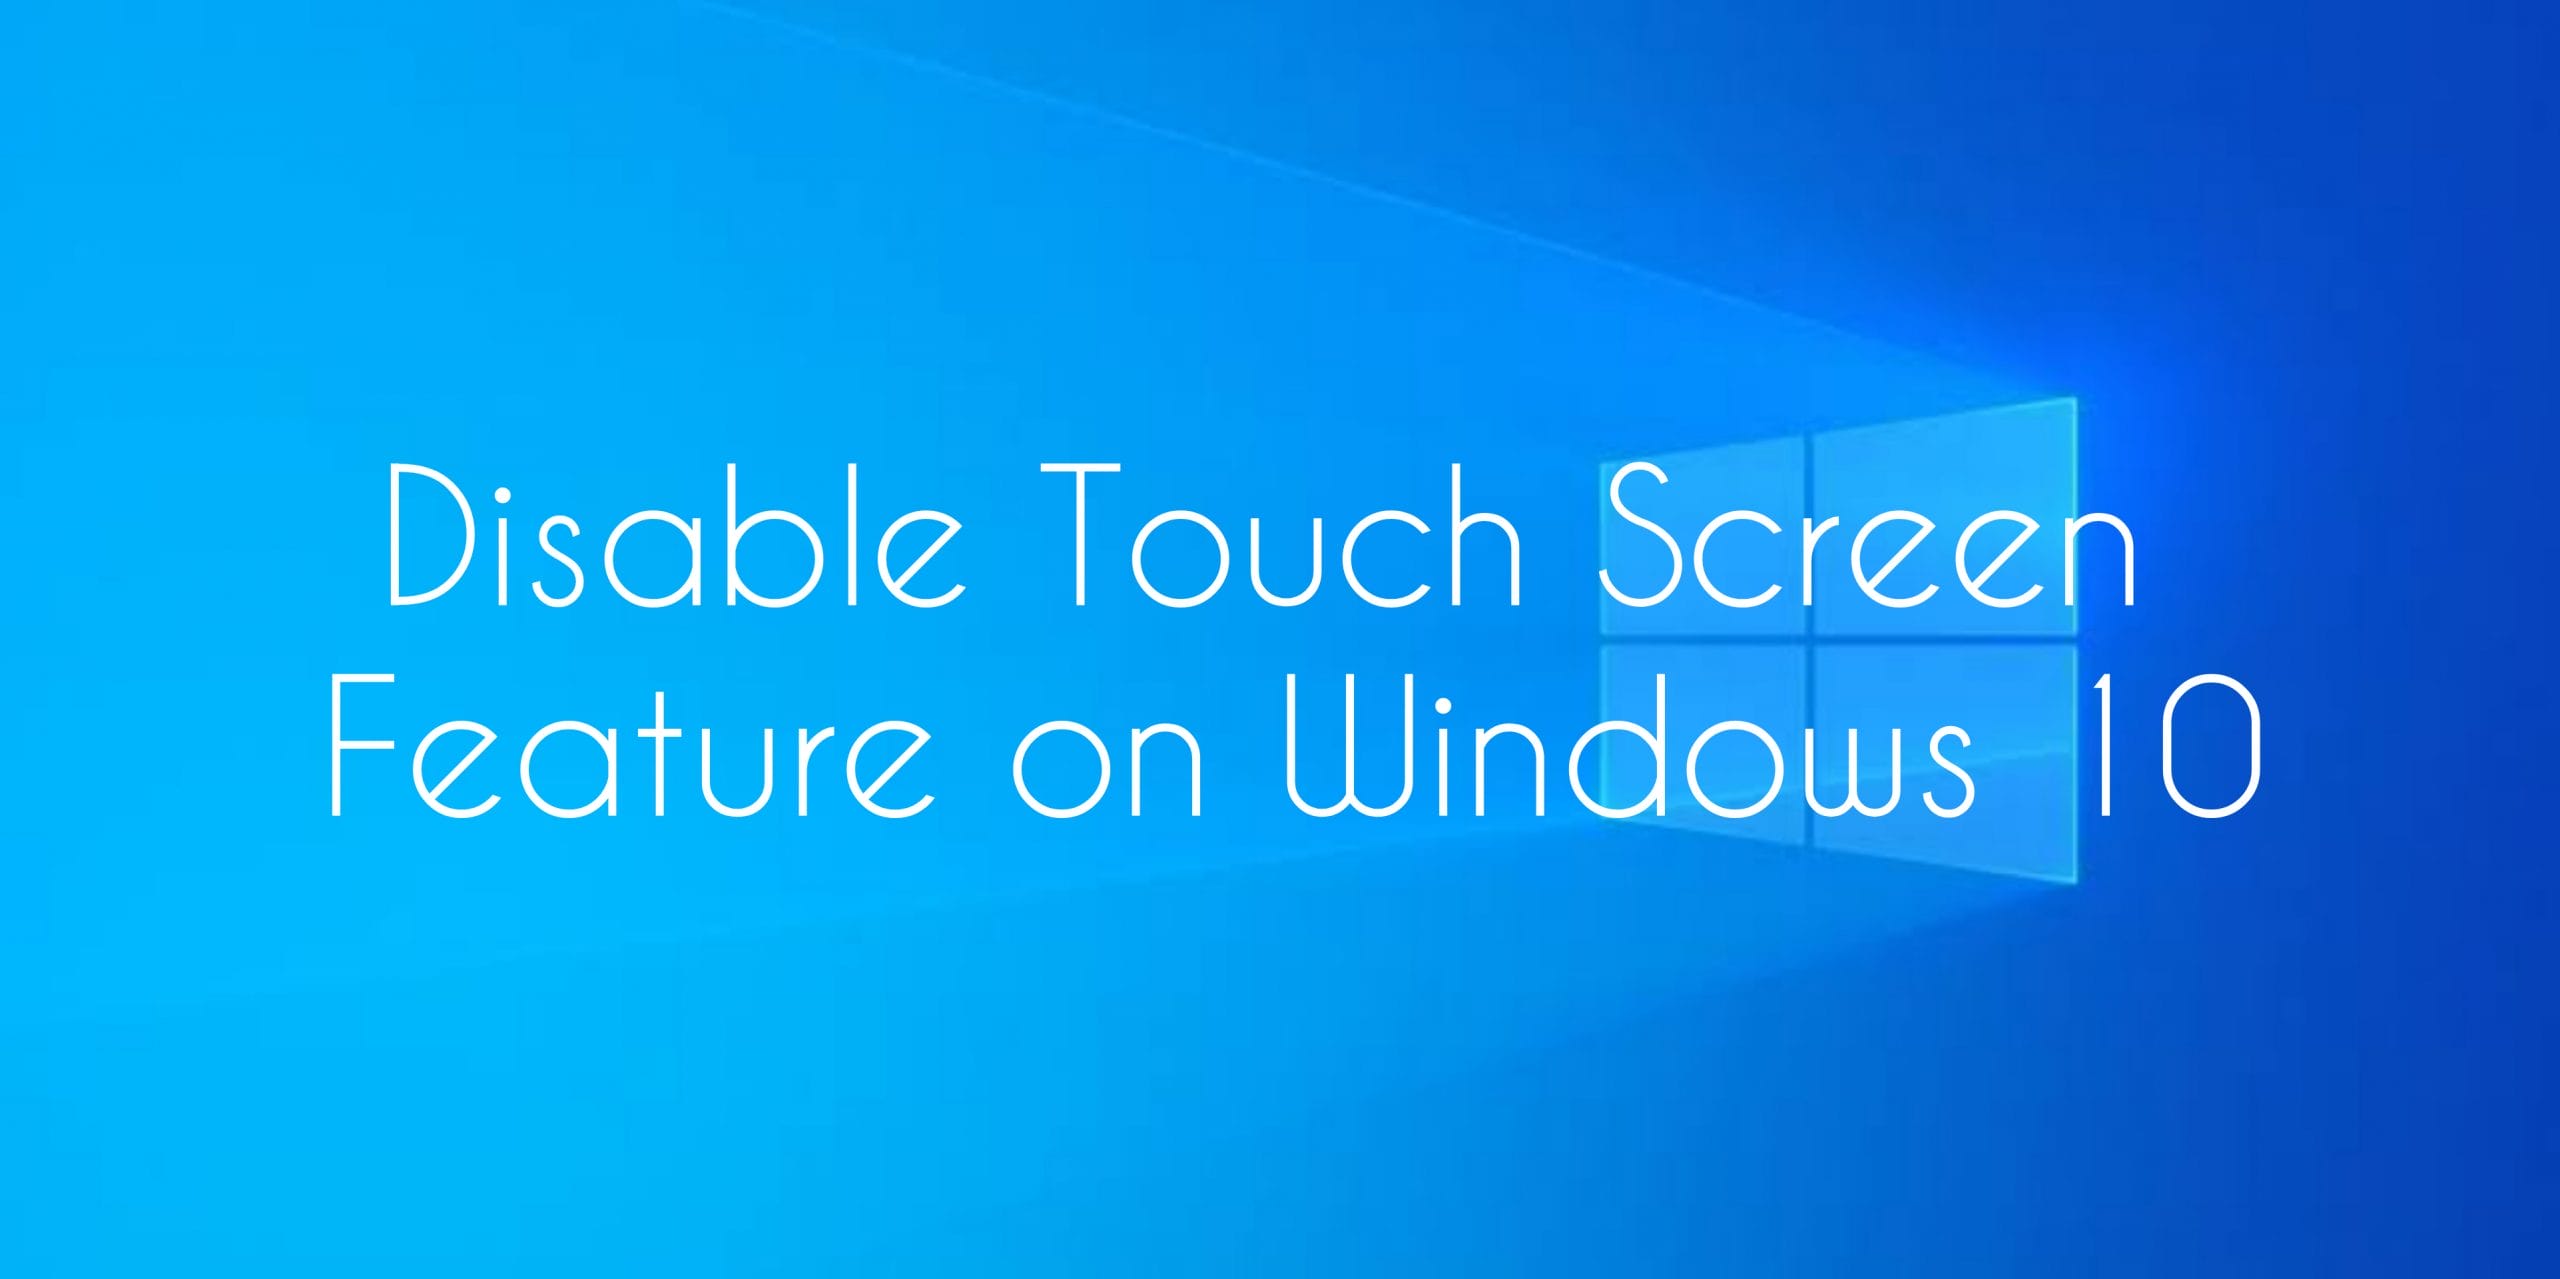 Disable Touch Screen Feature on Windows 10